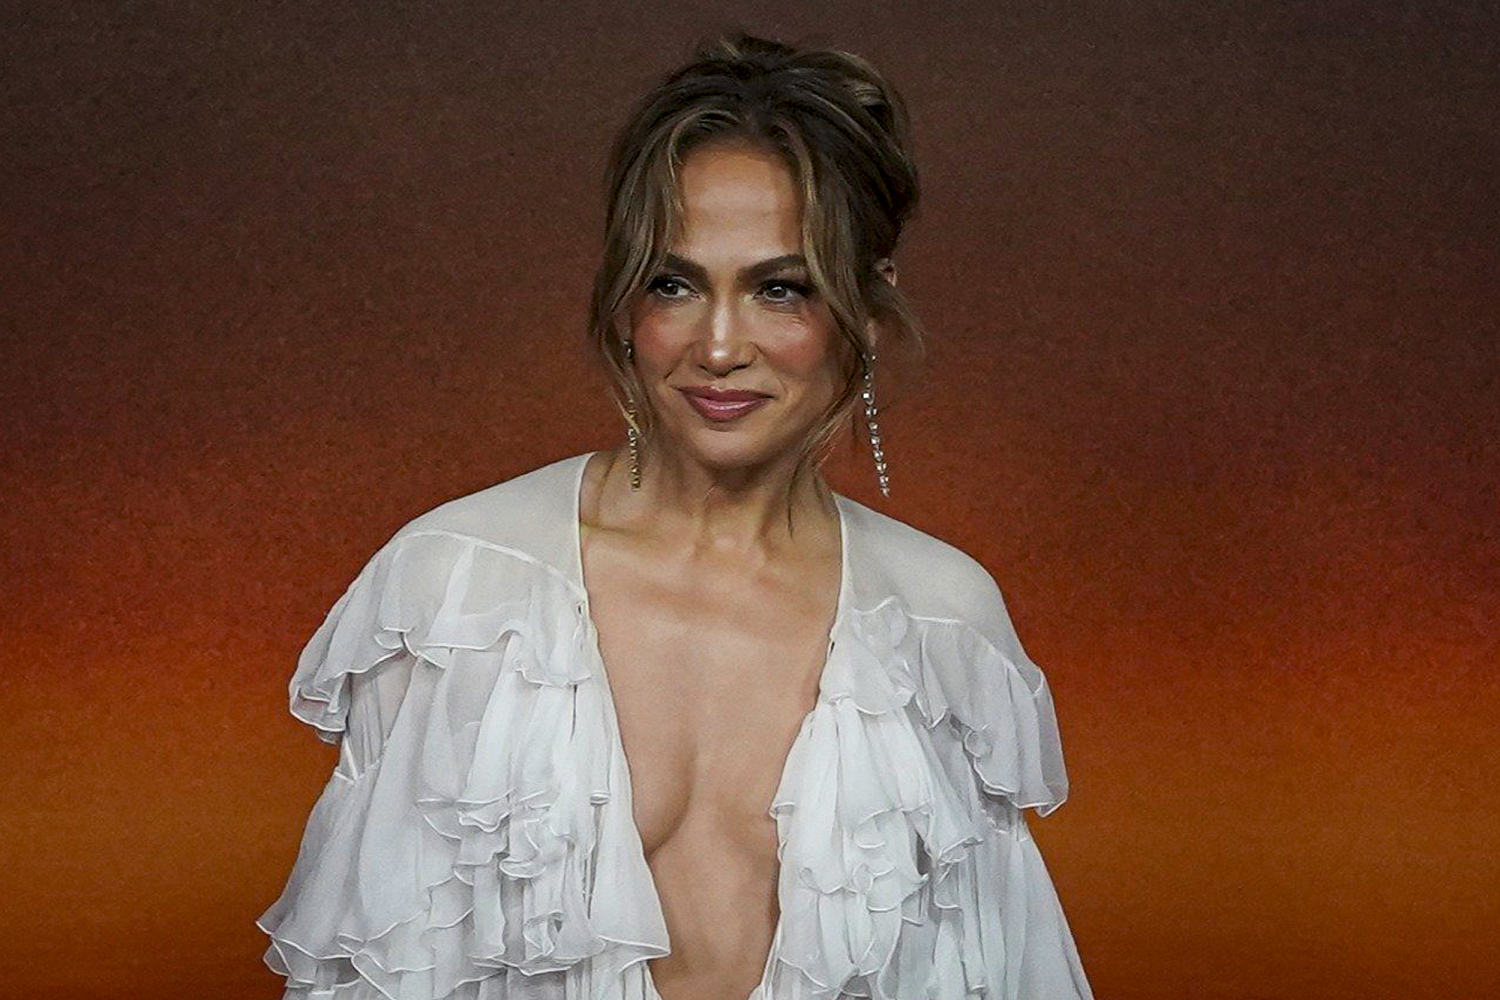 Jennifer Lopez cancels summer tour to spend time with family and friends